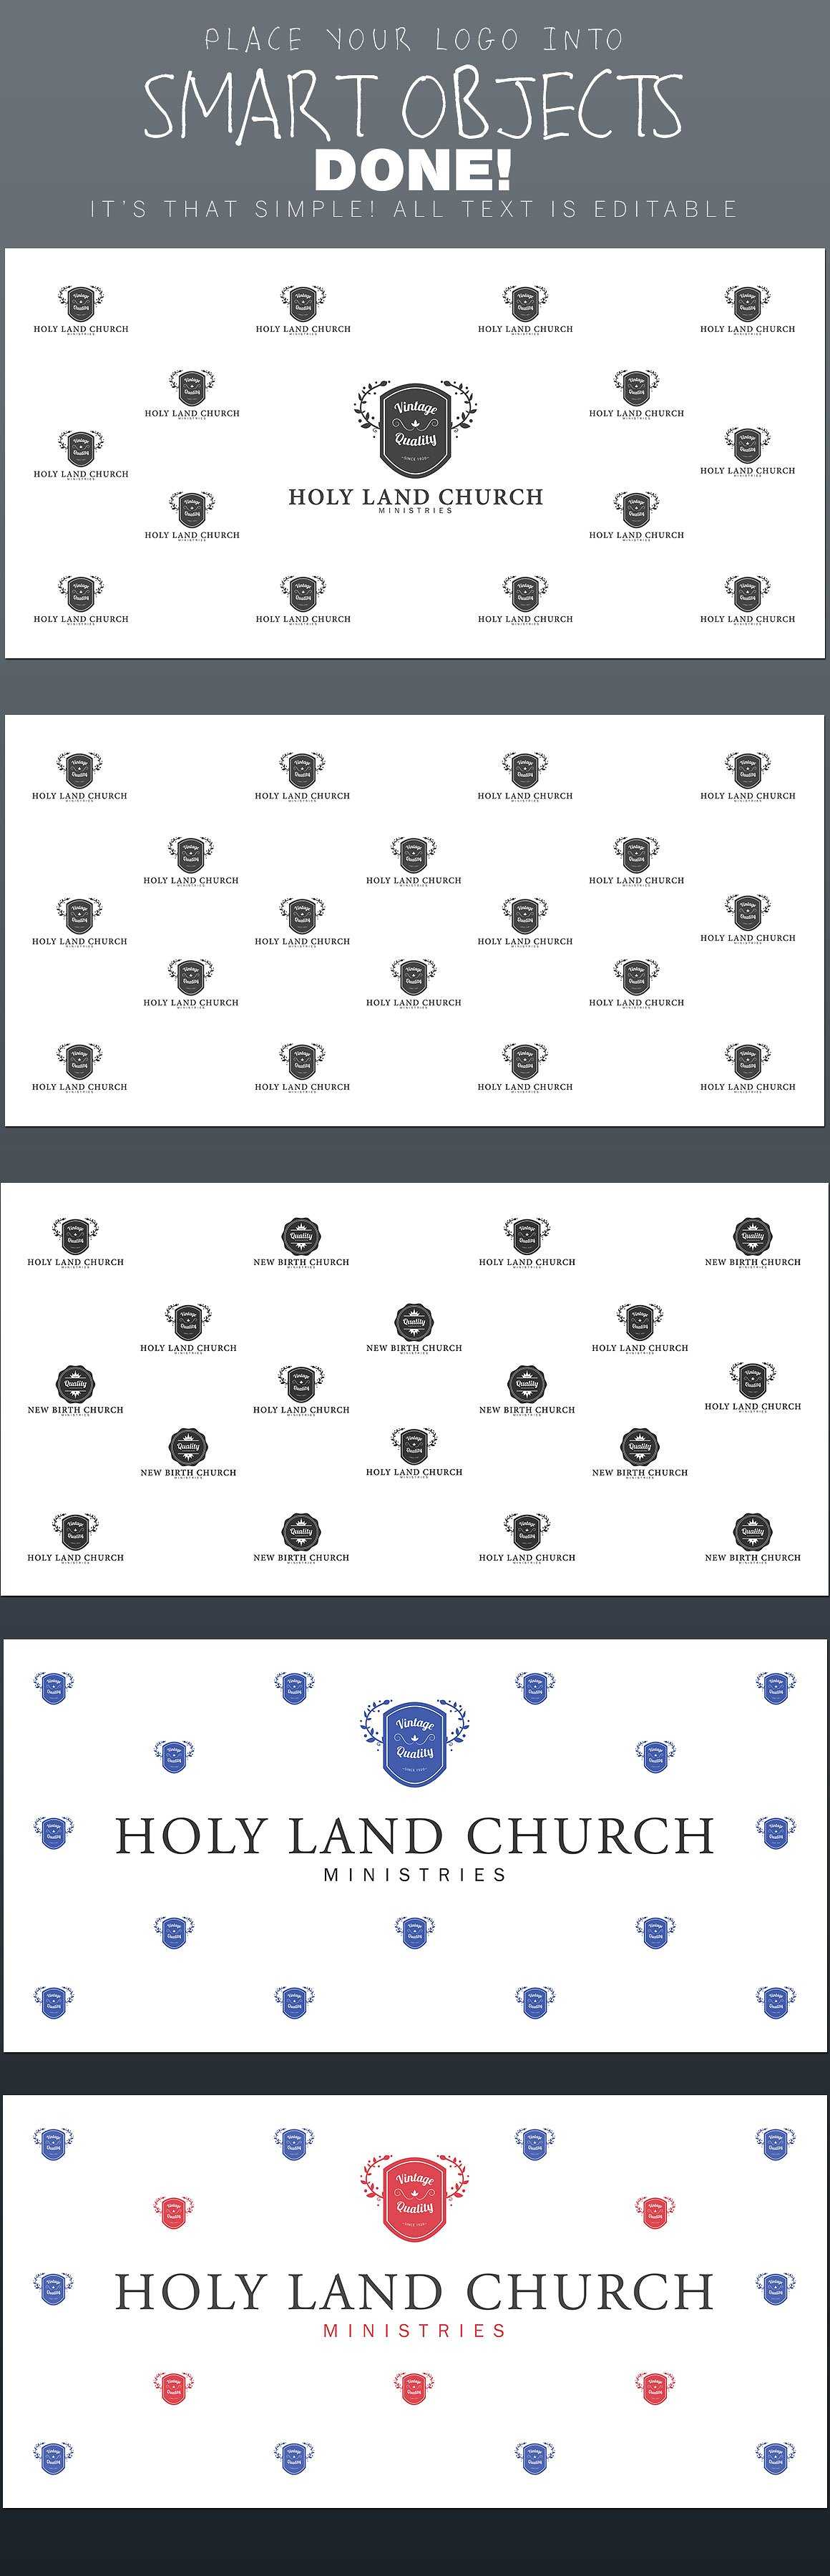 Step And Repeat Backdrop Photoshop Template Intended For Step And Repeat Banner Template